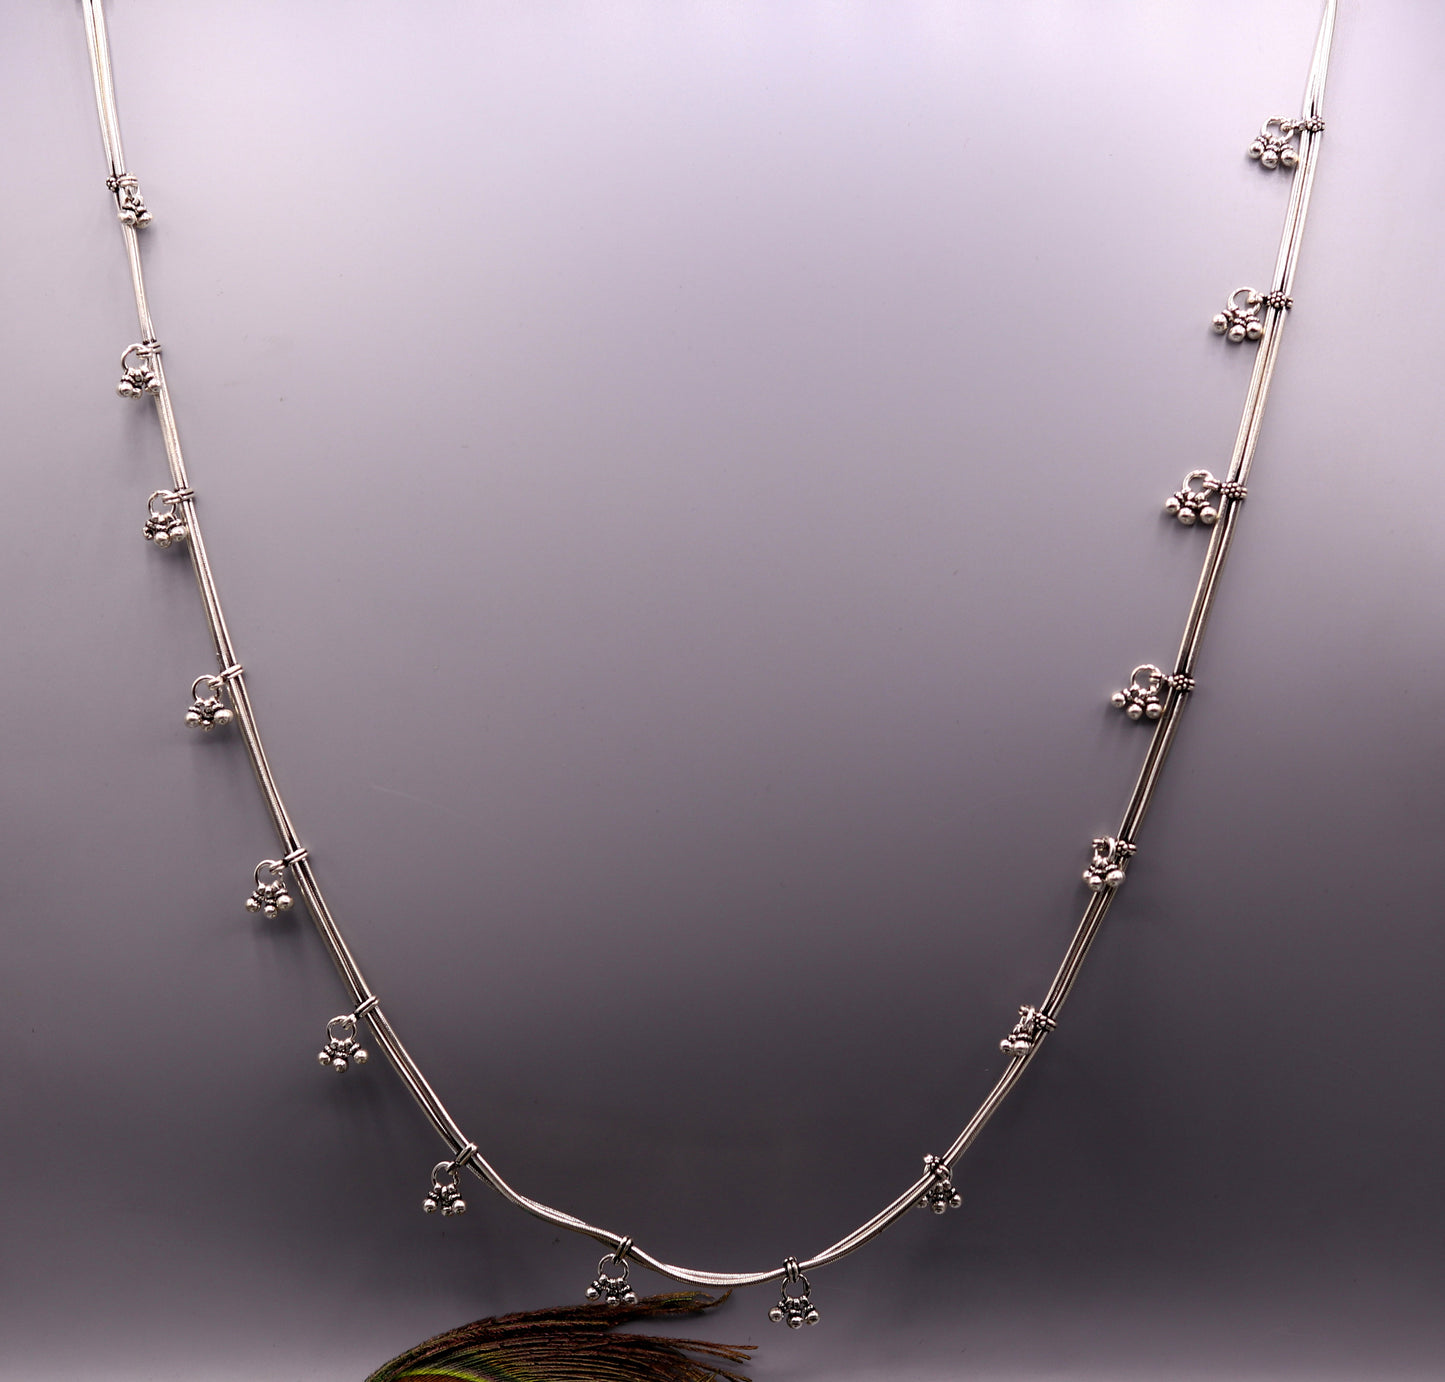 36" to 38.5" inches adjustable 925 sterling silver handmade vintage design awesome belly chain,waist chain belly dance tribal jewelry wch07 - TRIBAL ORNAMENTS